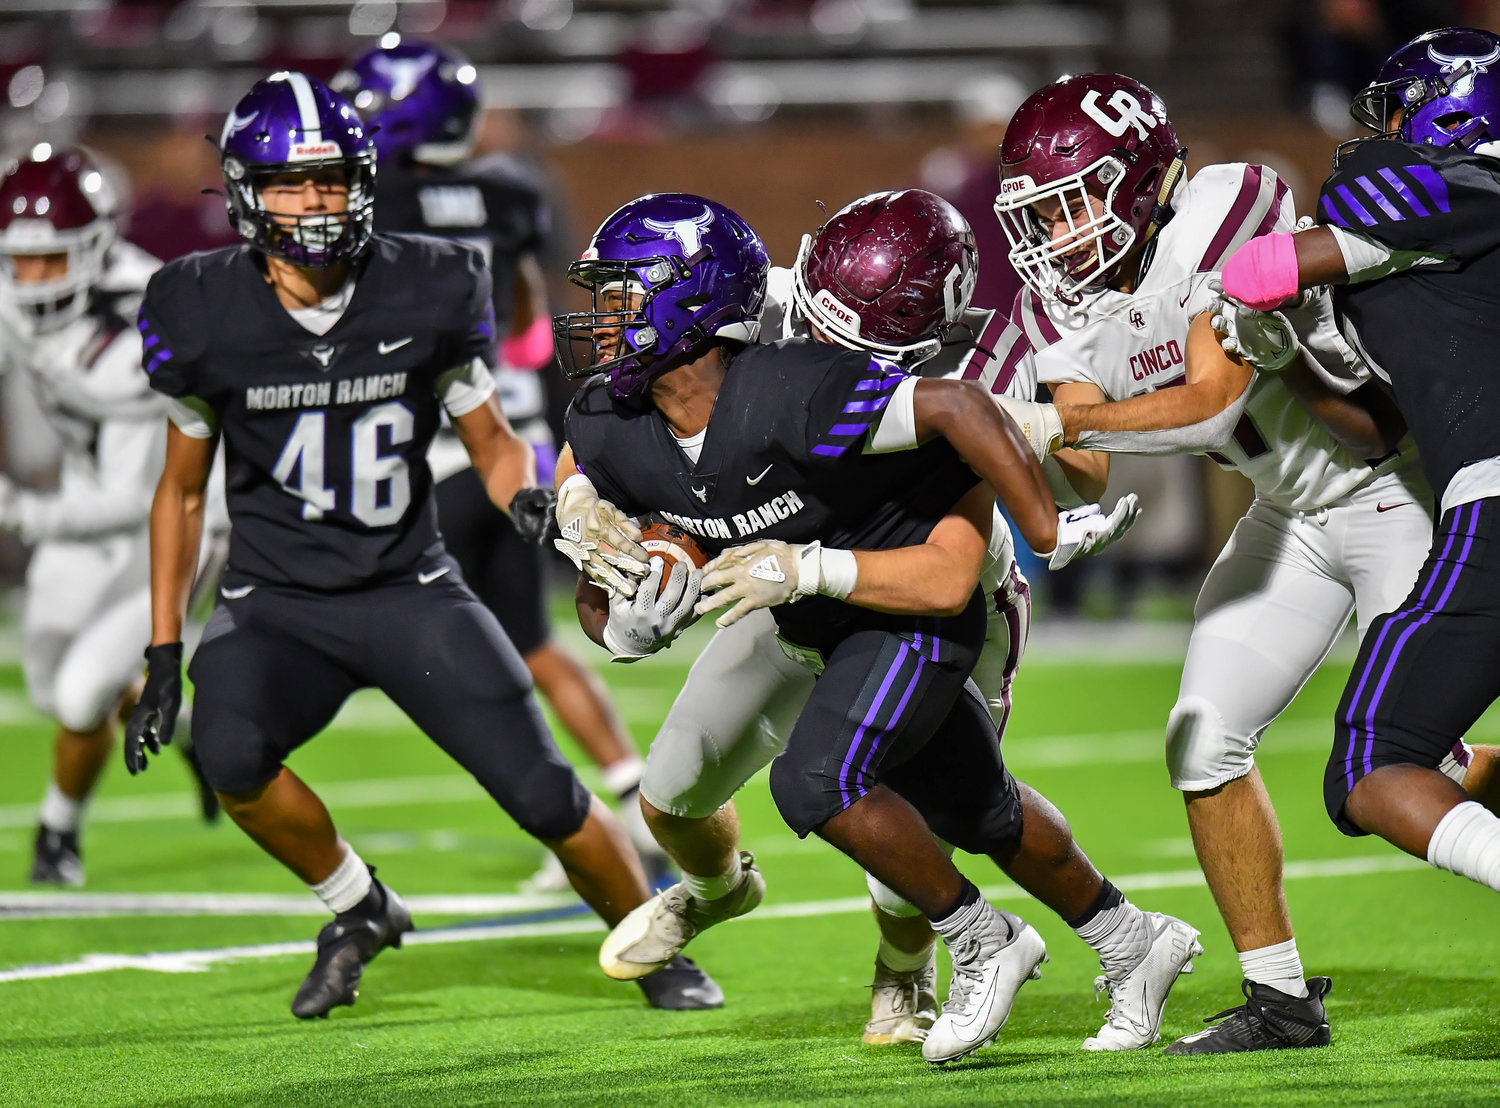 Katy, Tx. Oct 29, 2021: Morton Ranch Santana Scott #3 carries the ball up the middle before being brought down by Cougar defenders during a conference game between Cinco Ranch and Morton Ranch at Rhodes Stadium in Katy. (Photo by Mark Goodman / Katy Times)